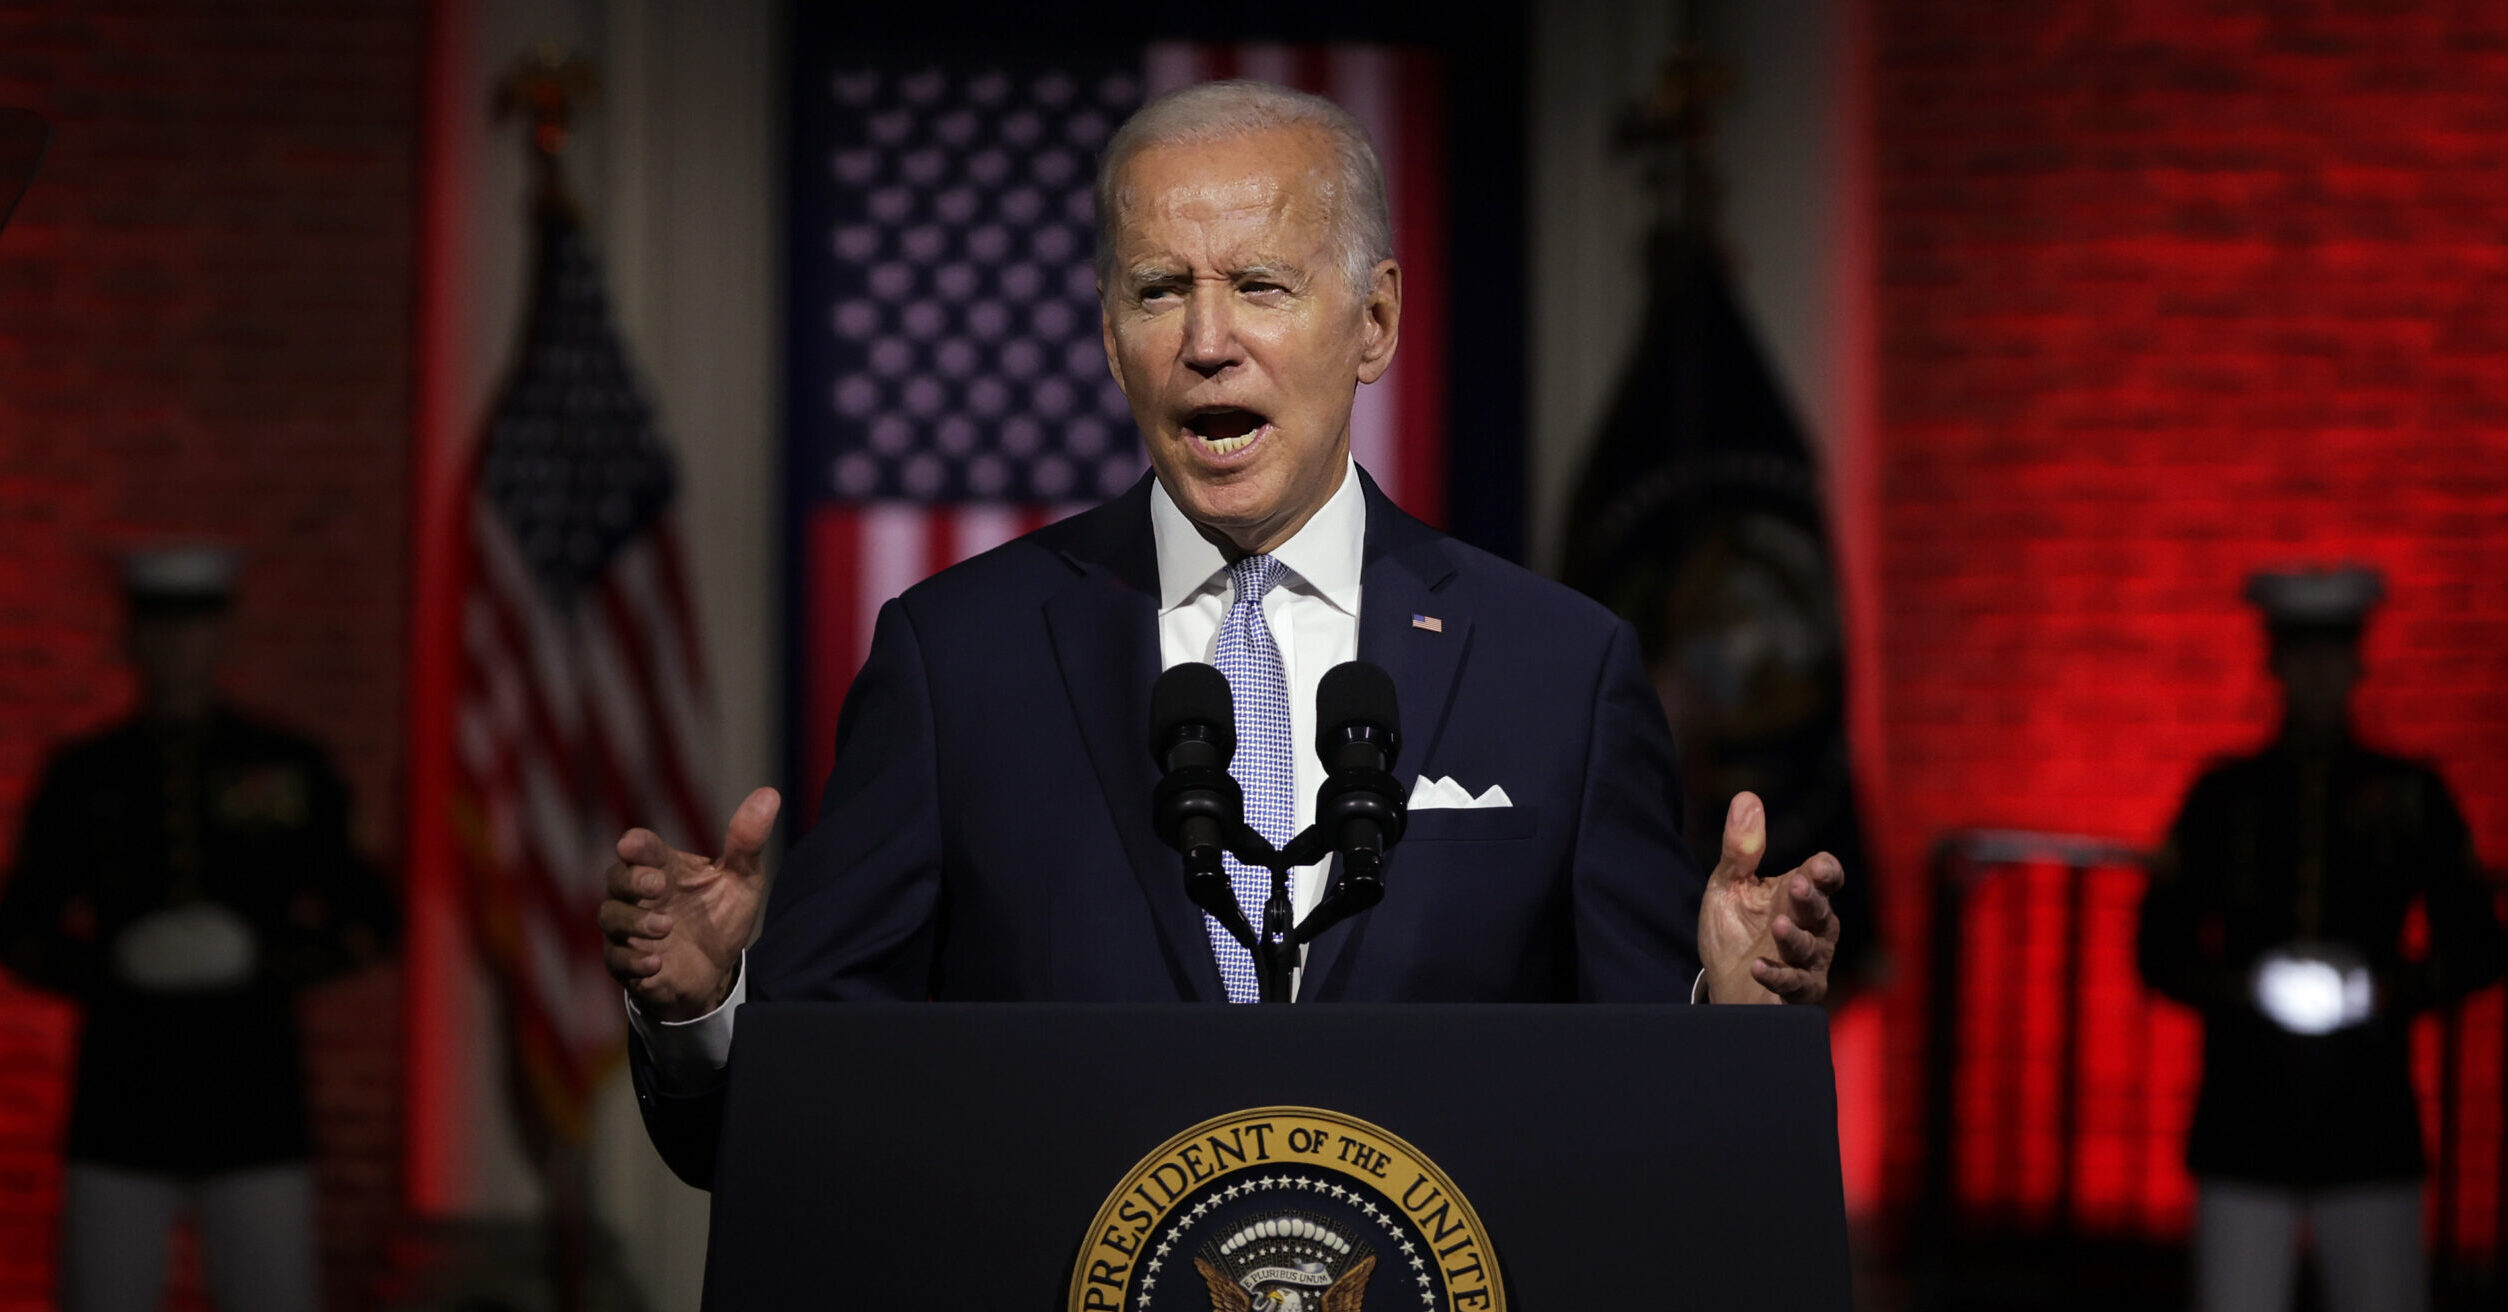 Broadcast Networks Declined to Carry Biden’s Speech Because It Was ‘Political’ and Criticized Trump: Report